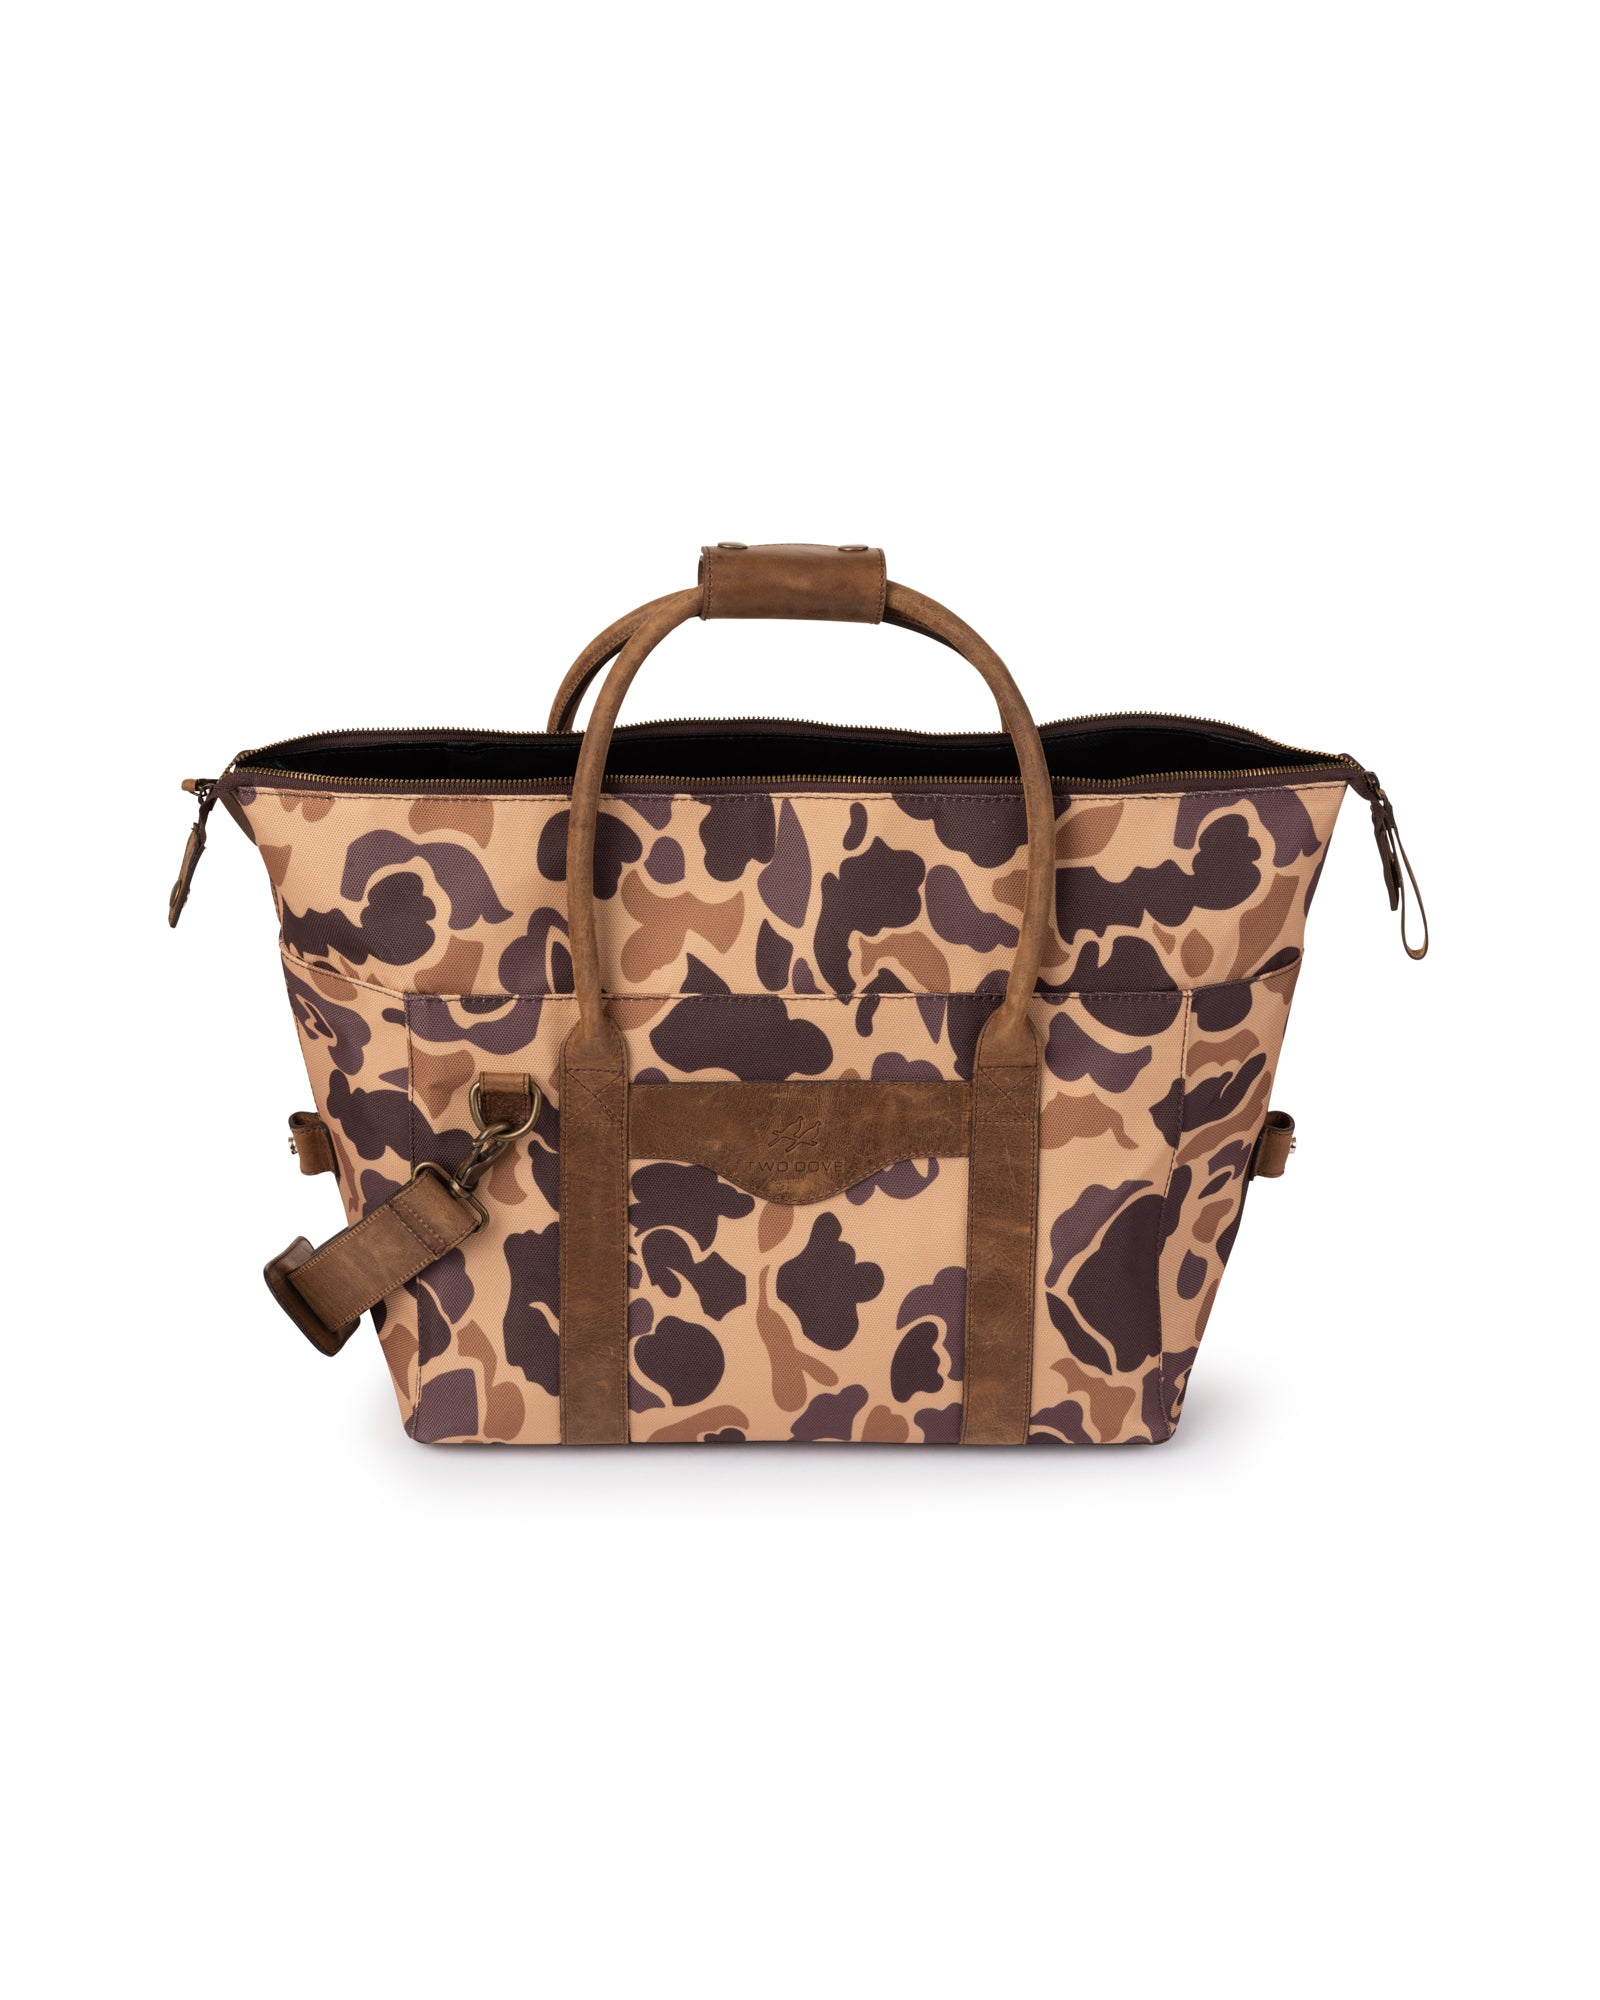 Vintage Camo Utility Cooler Bag - Two Dove Outdoors